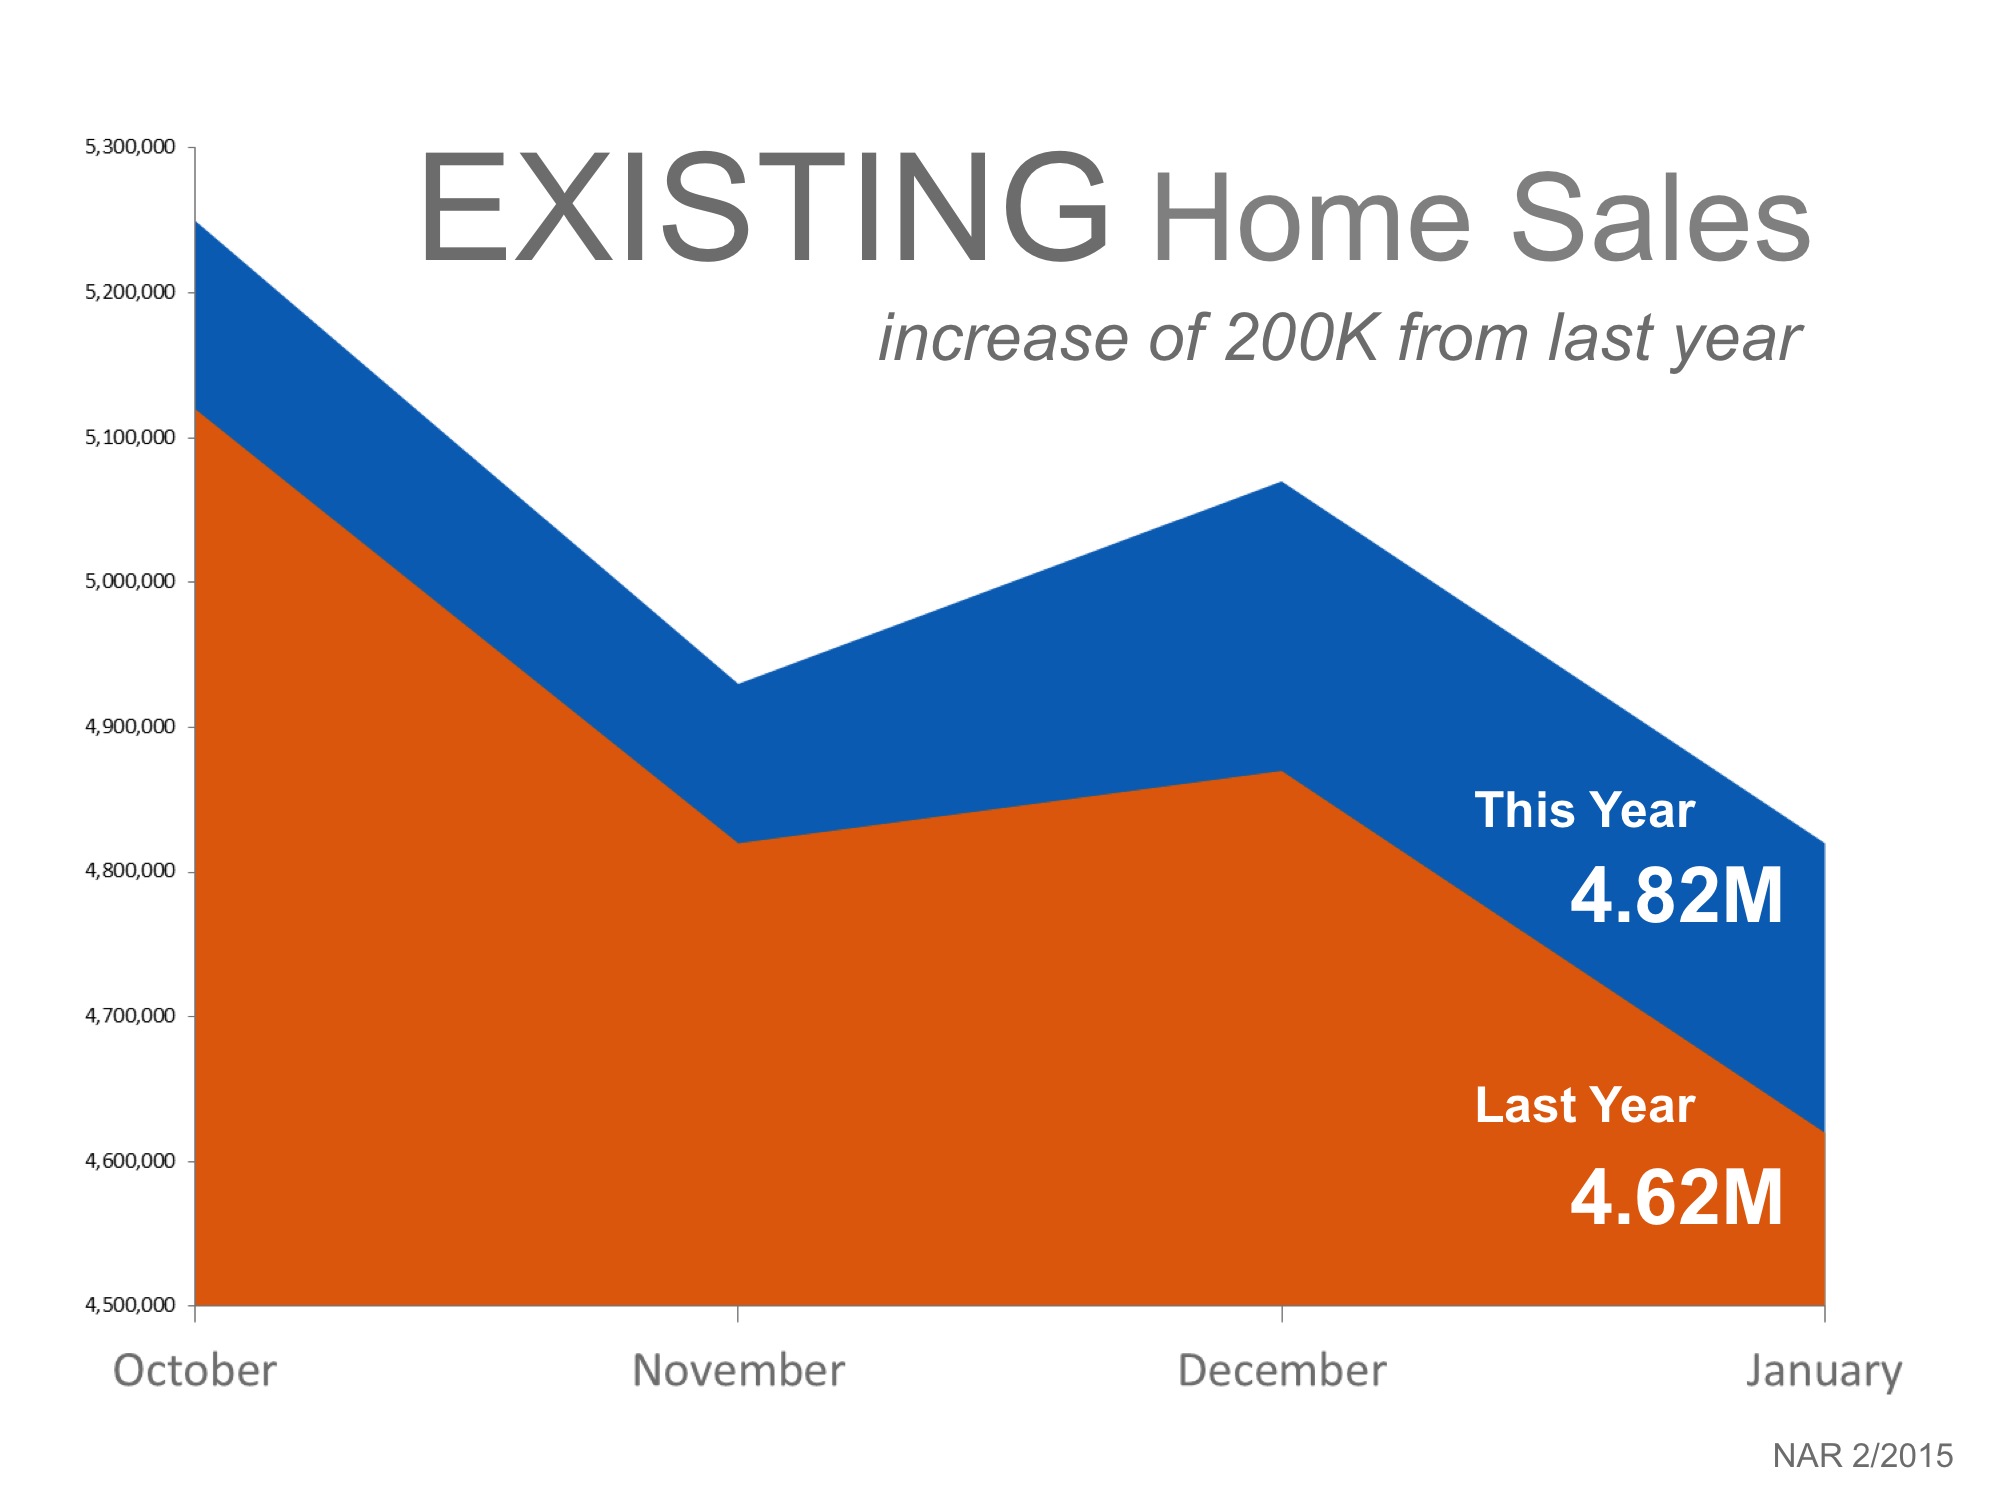 Existing Home Sales Year-over-Year | Simplifying The Market